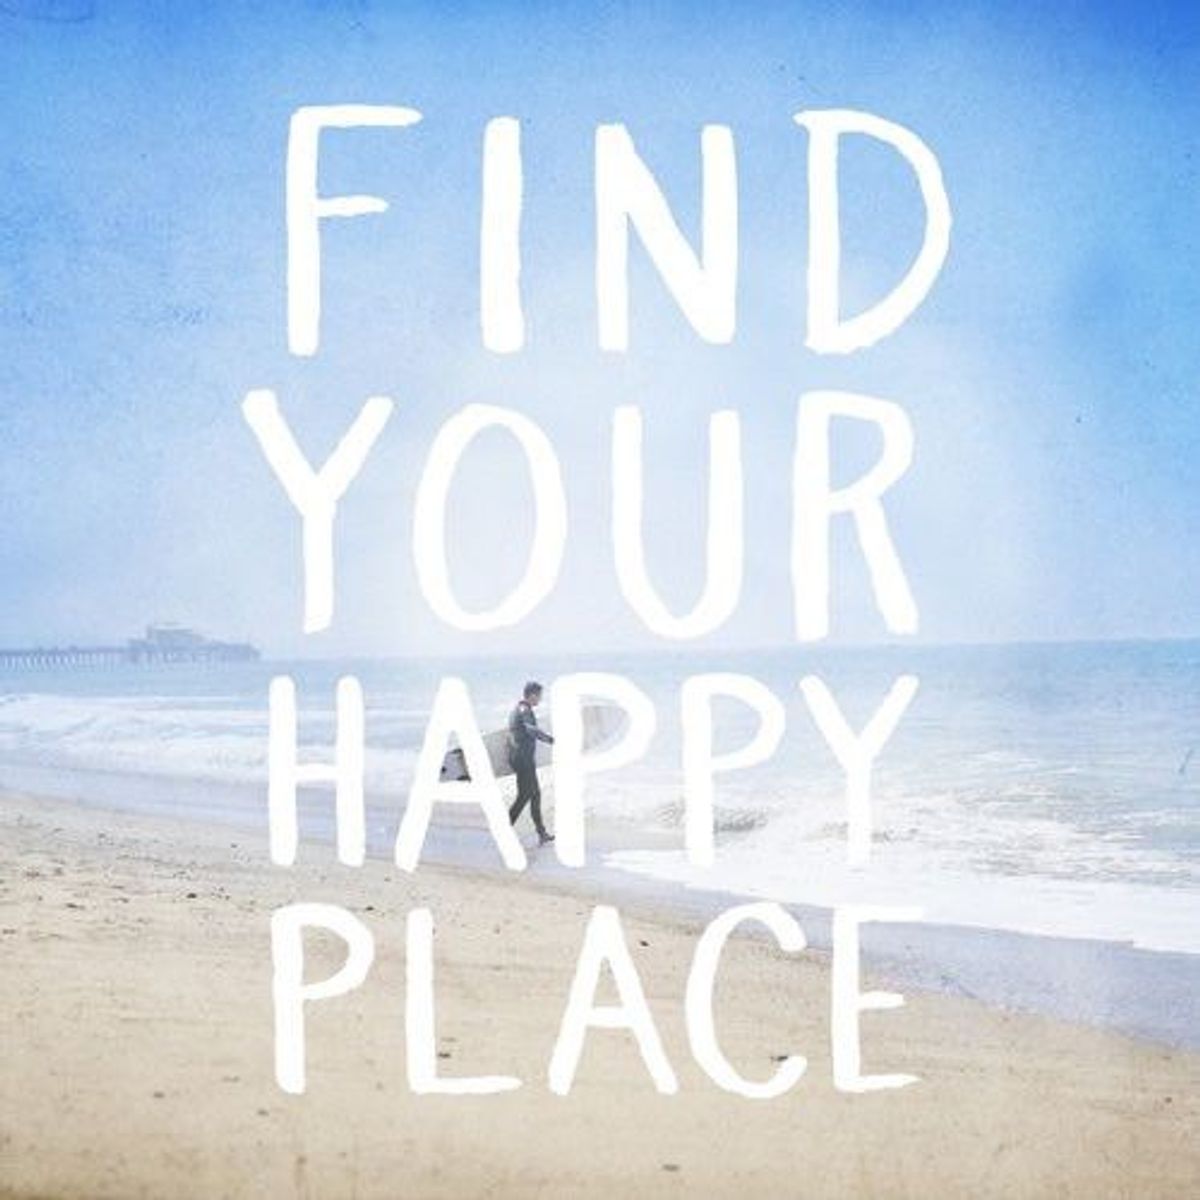 Find Your Happy Place